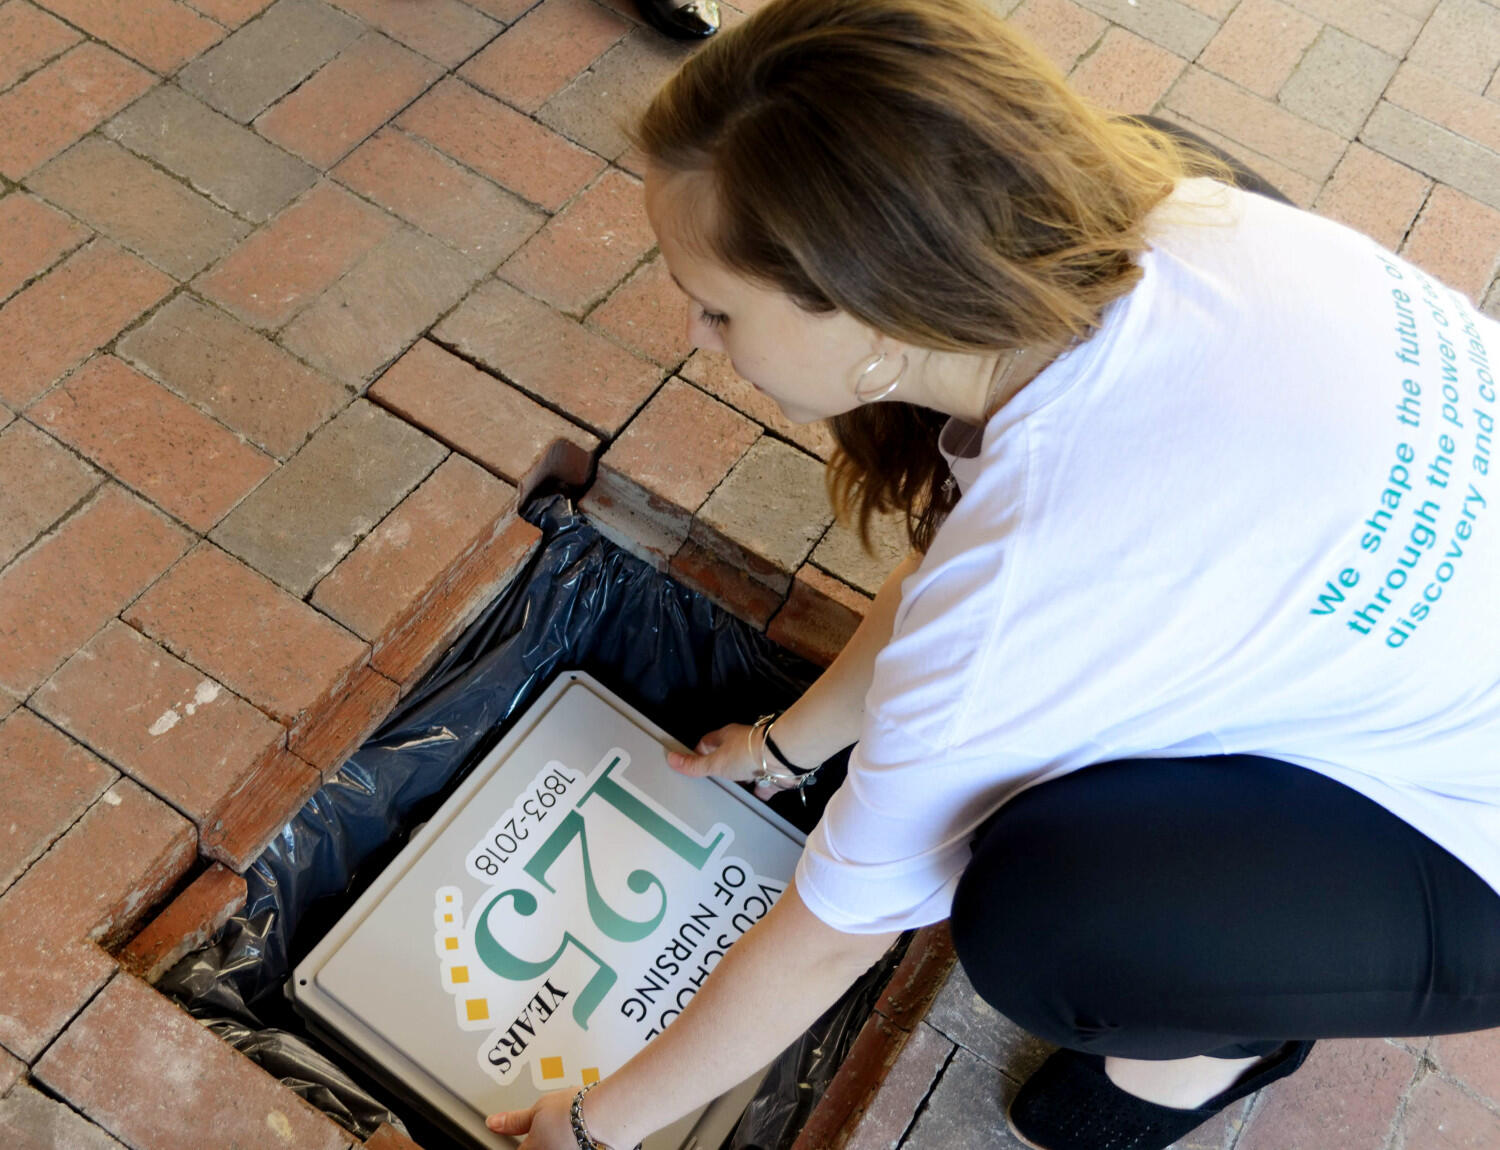 A woman in a white T-shirt puts a box labeled "125" in a hole surrounded by bricks.